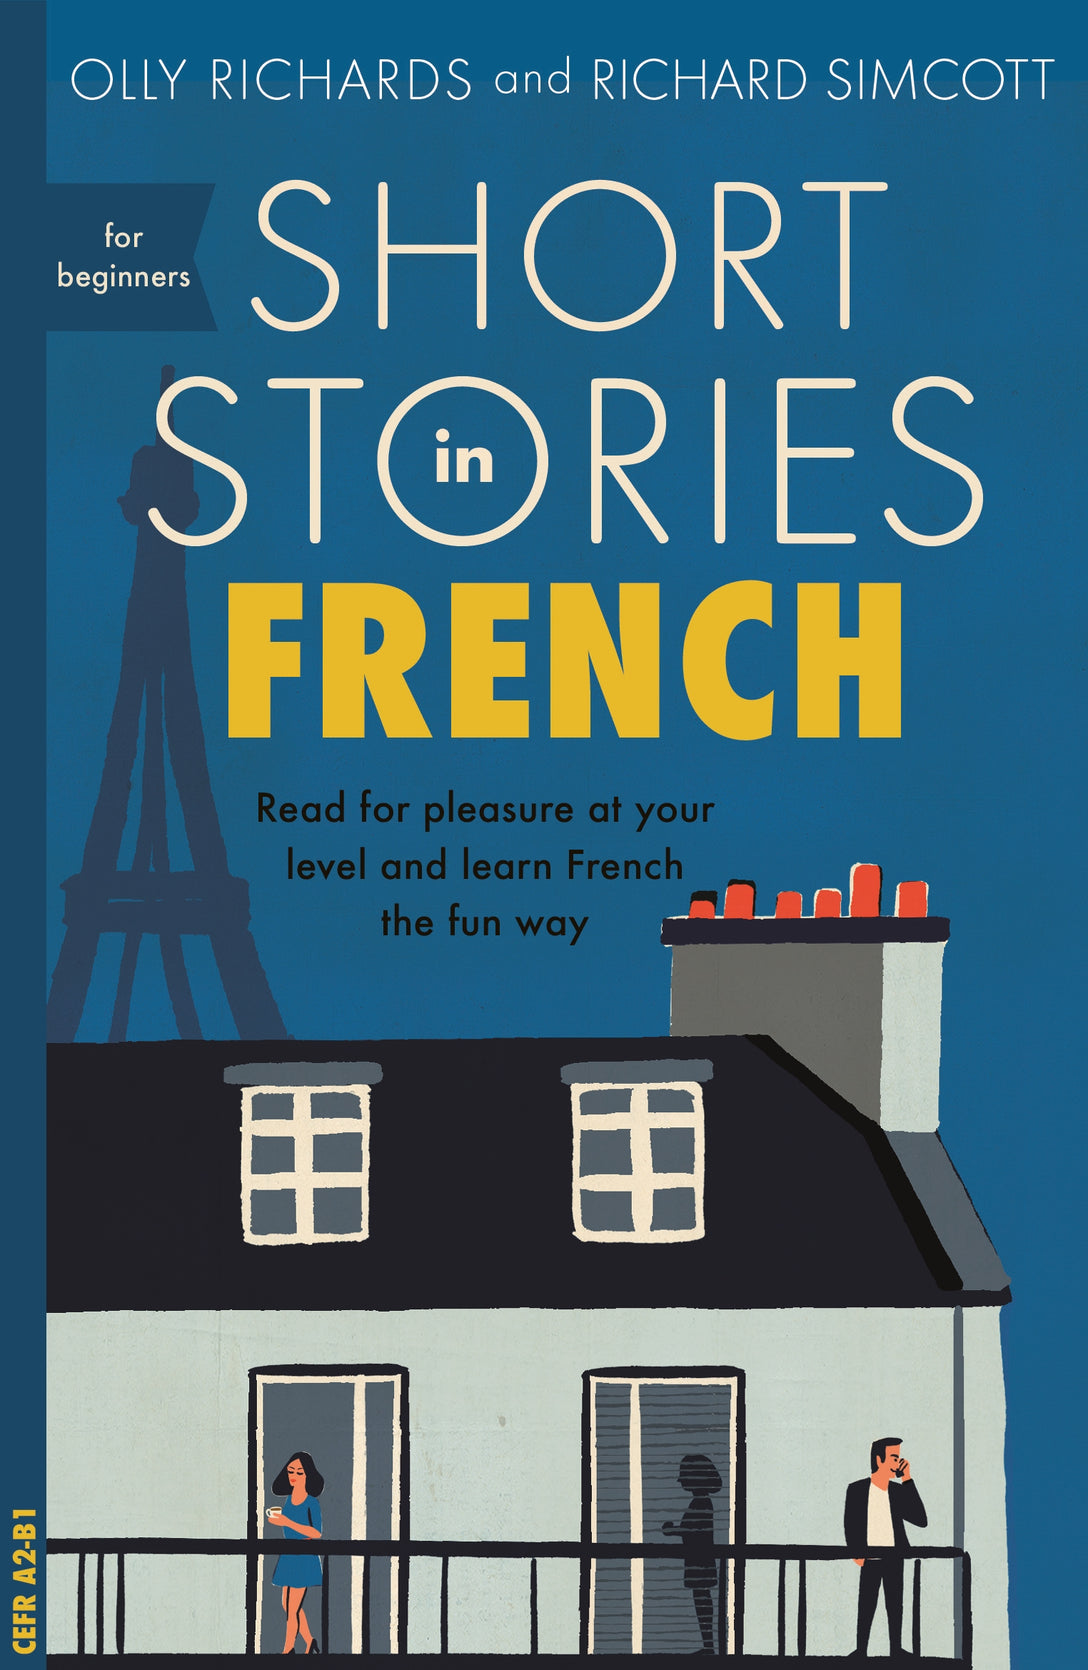 Short Stories in French for Beginners by Olly Richards, Richard Simcott